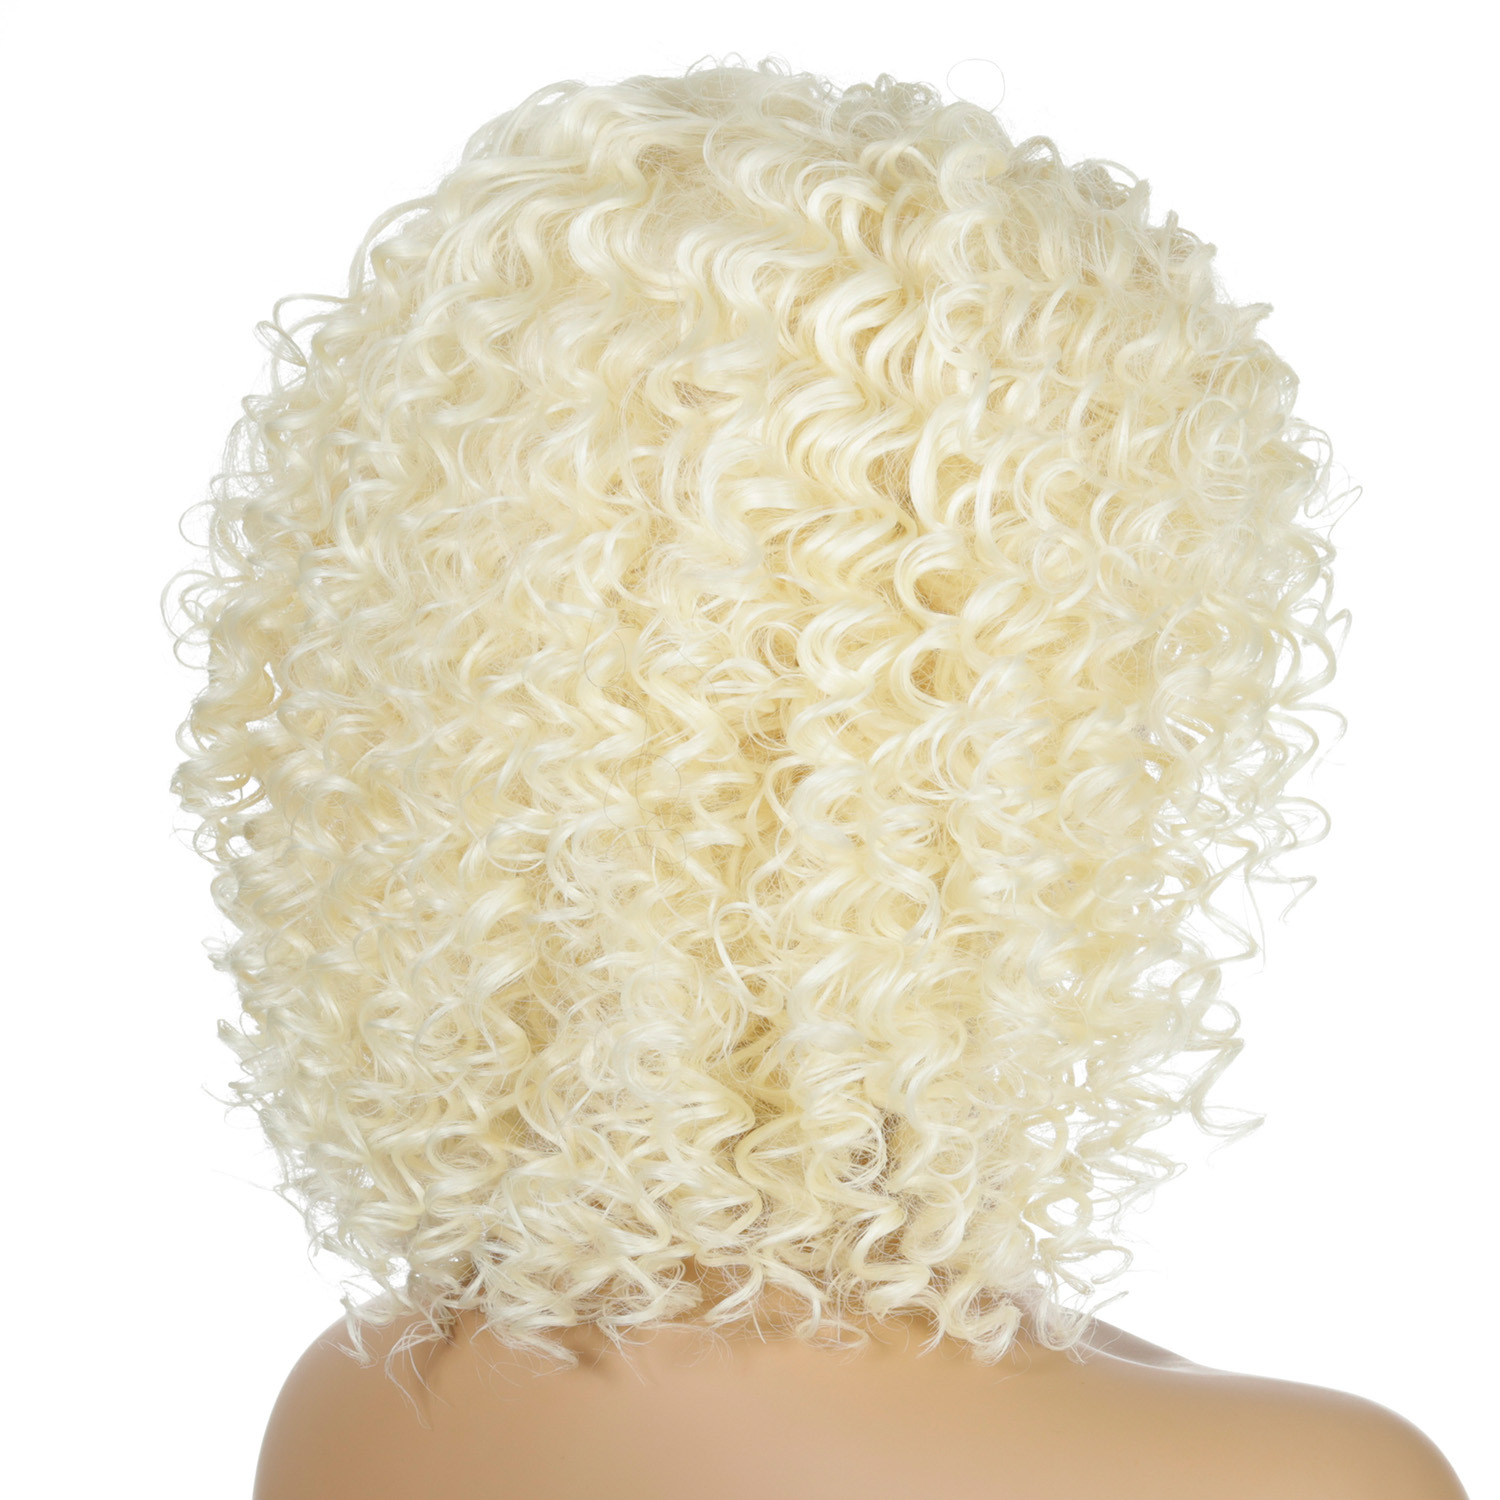 A wig with multicolor small curly hair, made of synthetic material, designed for women